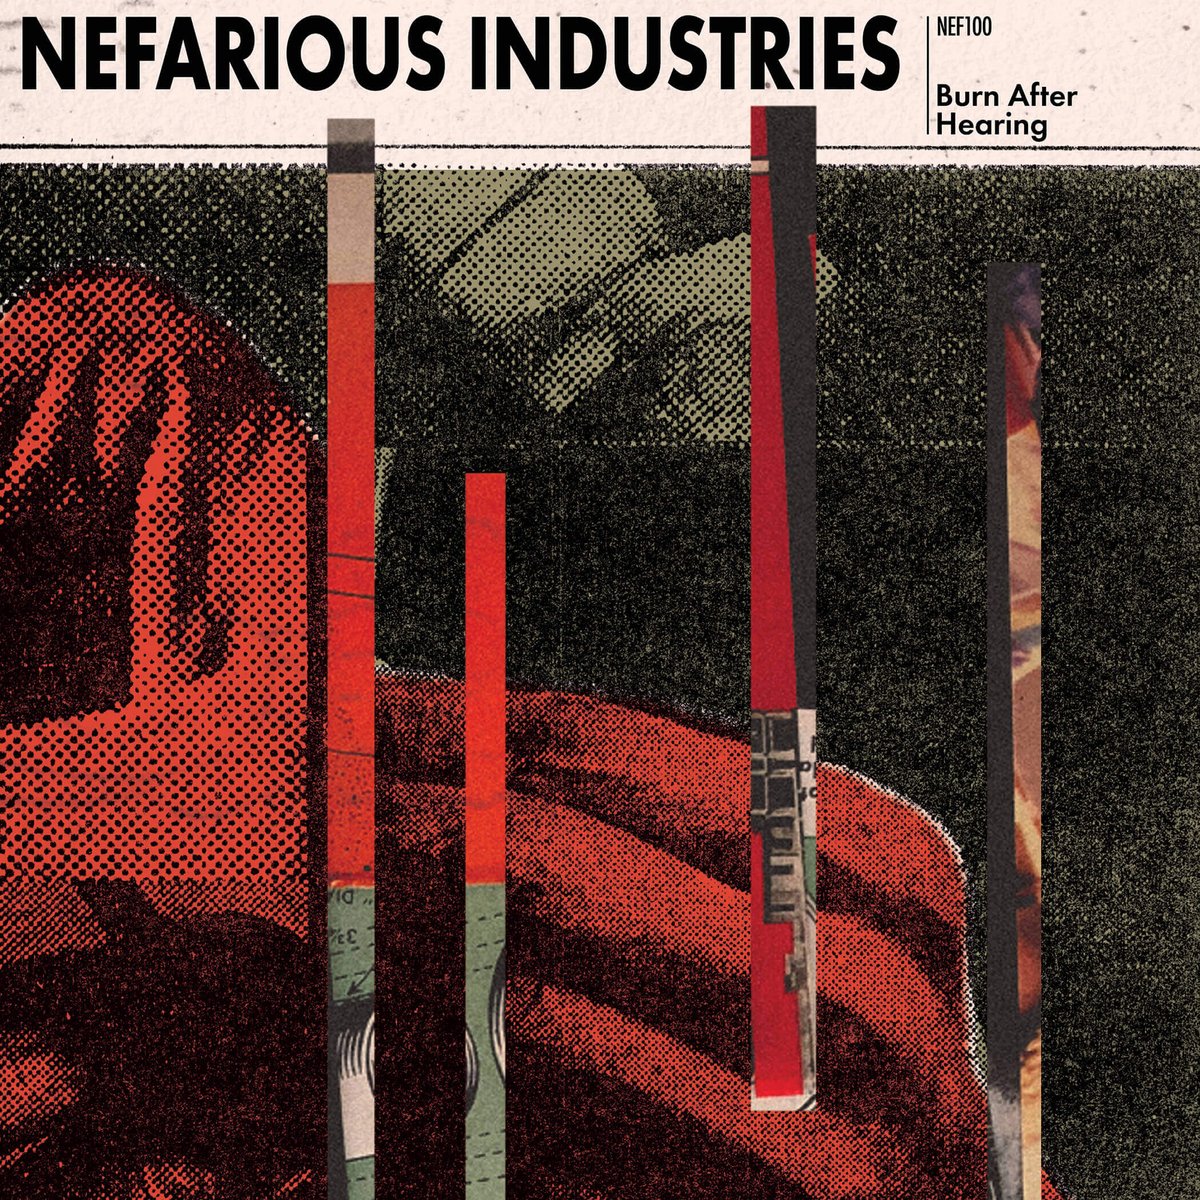 NEF100: Burn After Hearing – Nefarious Industries Compilation LP Presents Exclusive Tracks By Fourteen Flagship Label Artists; New Videos/Singles From GEMATRIA And GRIDFAILURE Posted earsplitcompound.com/nef100-burn-af… @NefariousInd @GRIDFAILURE @riskrelay @cinemacinema @humansetcetera